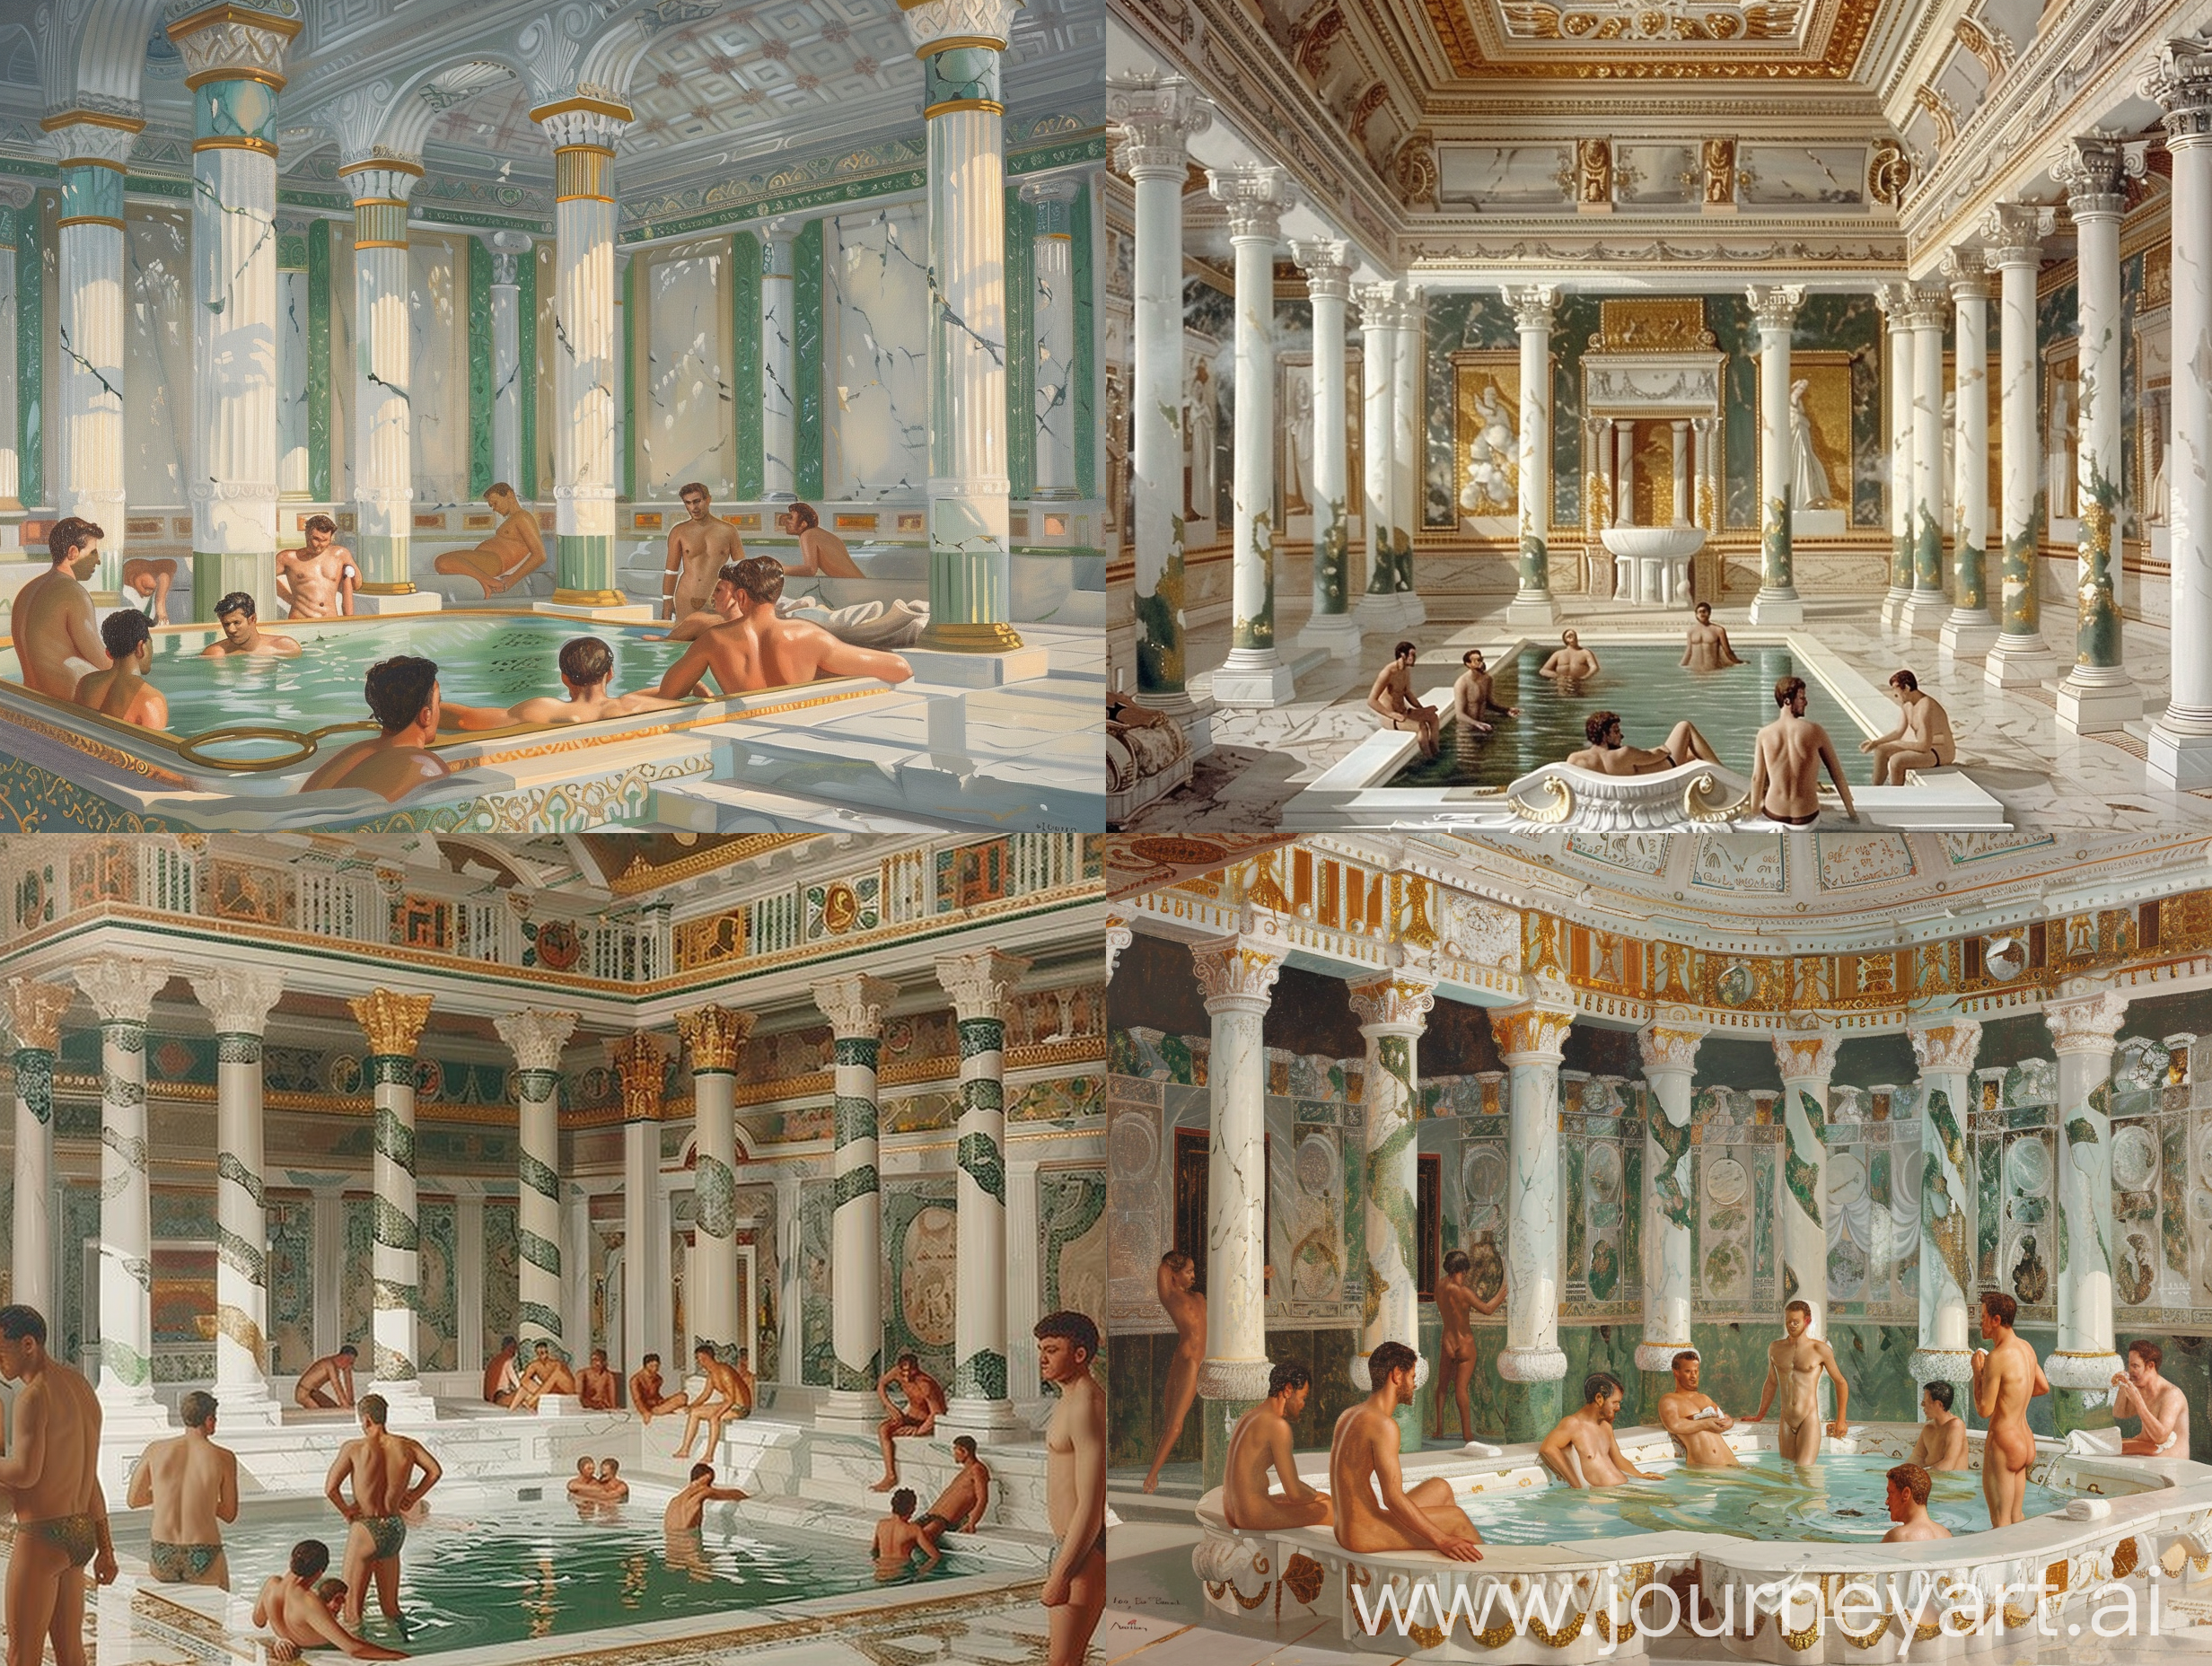 Baroque style oil painting, men's bath in ancient Greece, full of luxury, Turkish bath with beautiful gilded white marble pool and white and green marble columns, attractive men bathing and relaxing, very beautiful painting